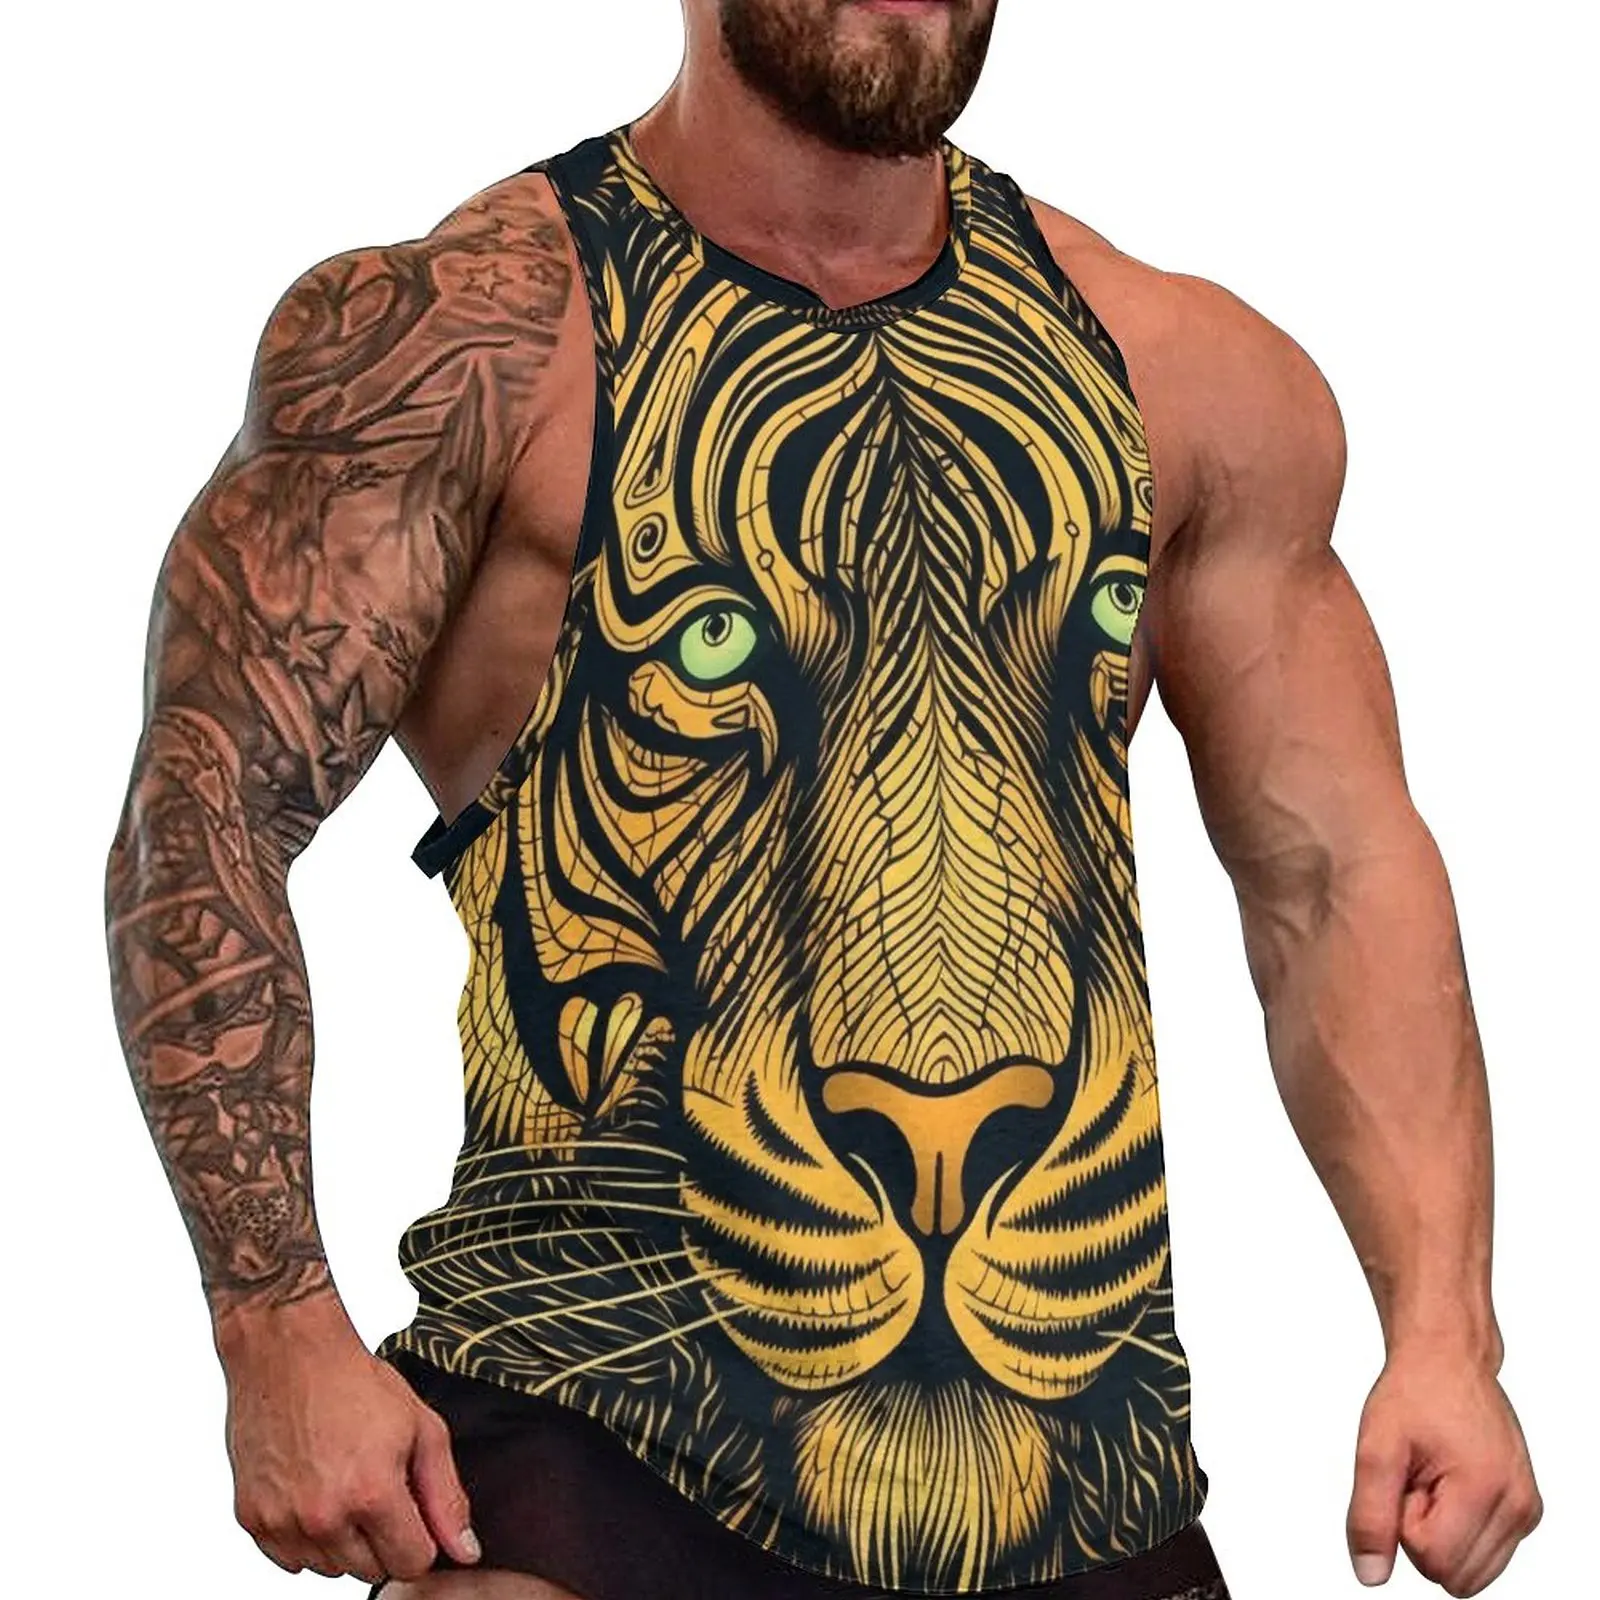 

Tiger Tank Top Male Portraits Psychedelic Lines Tops Summer Custom Gym Streetwear Oversize Sleeveless Shirts